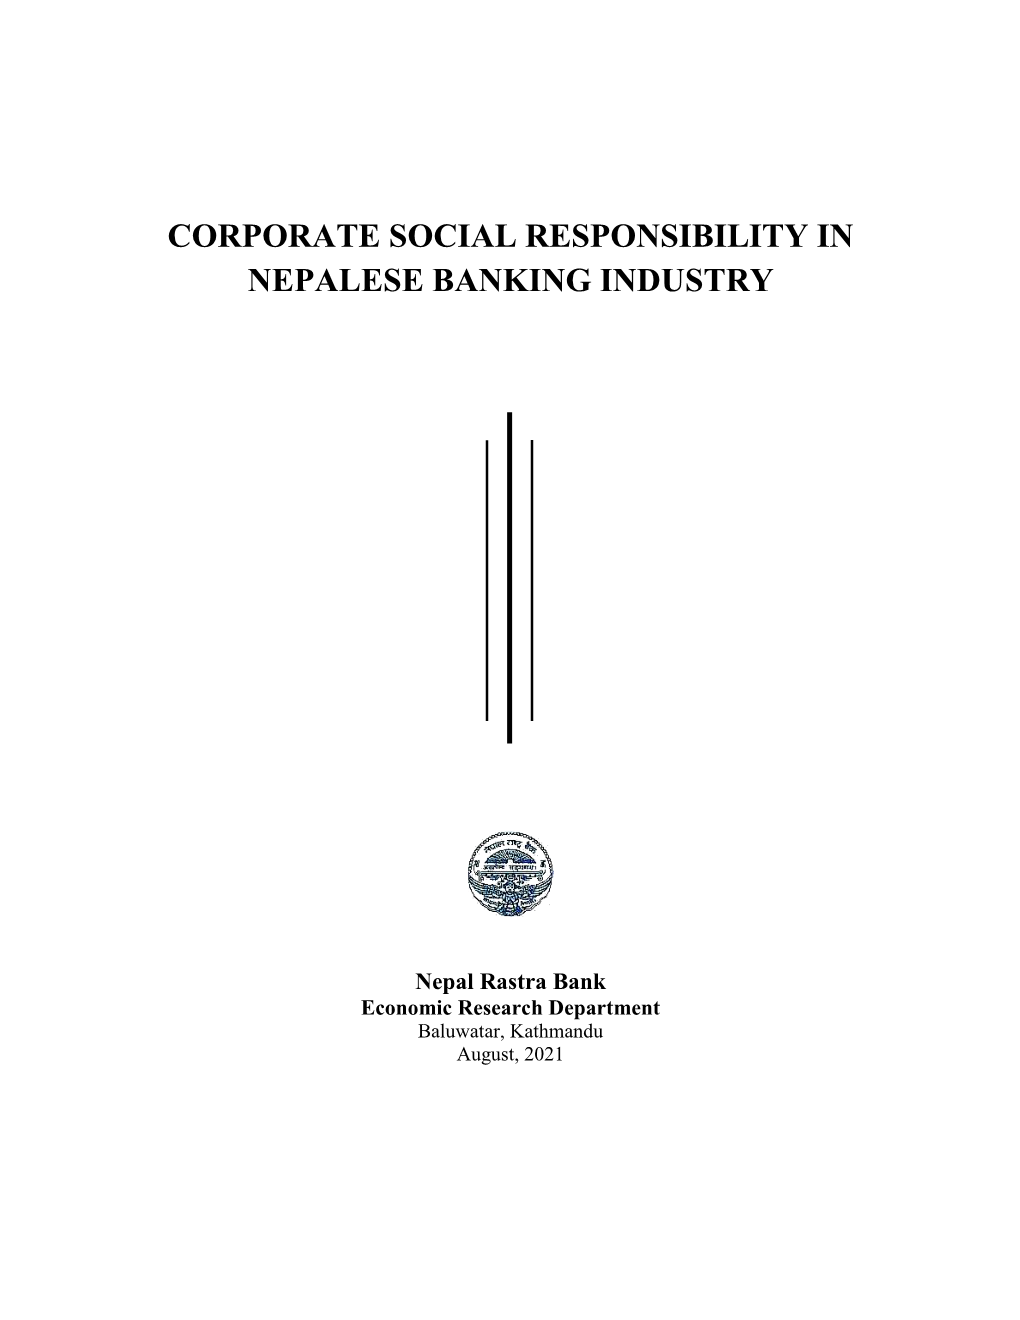 Corporate Social Responsibility in Nepalese Banking Industry